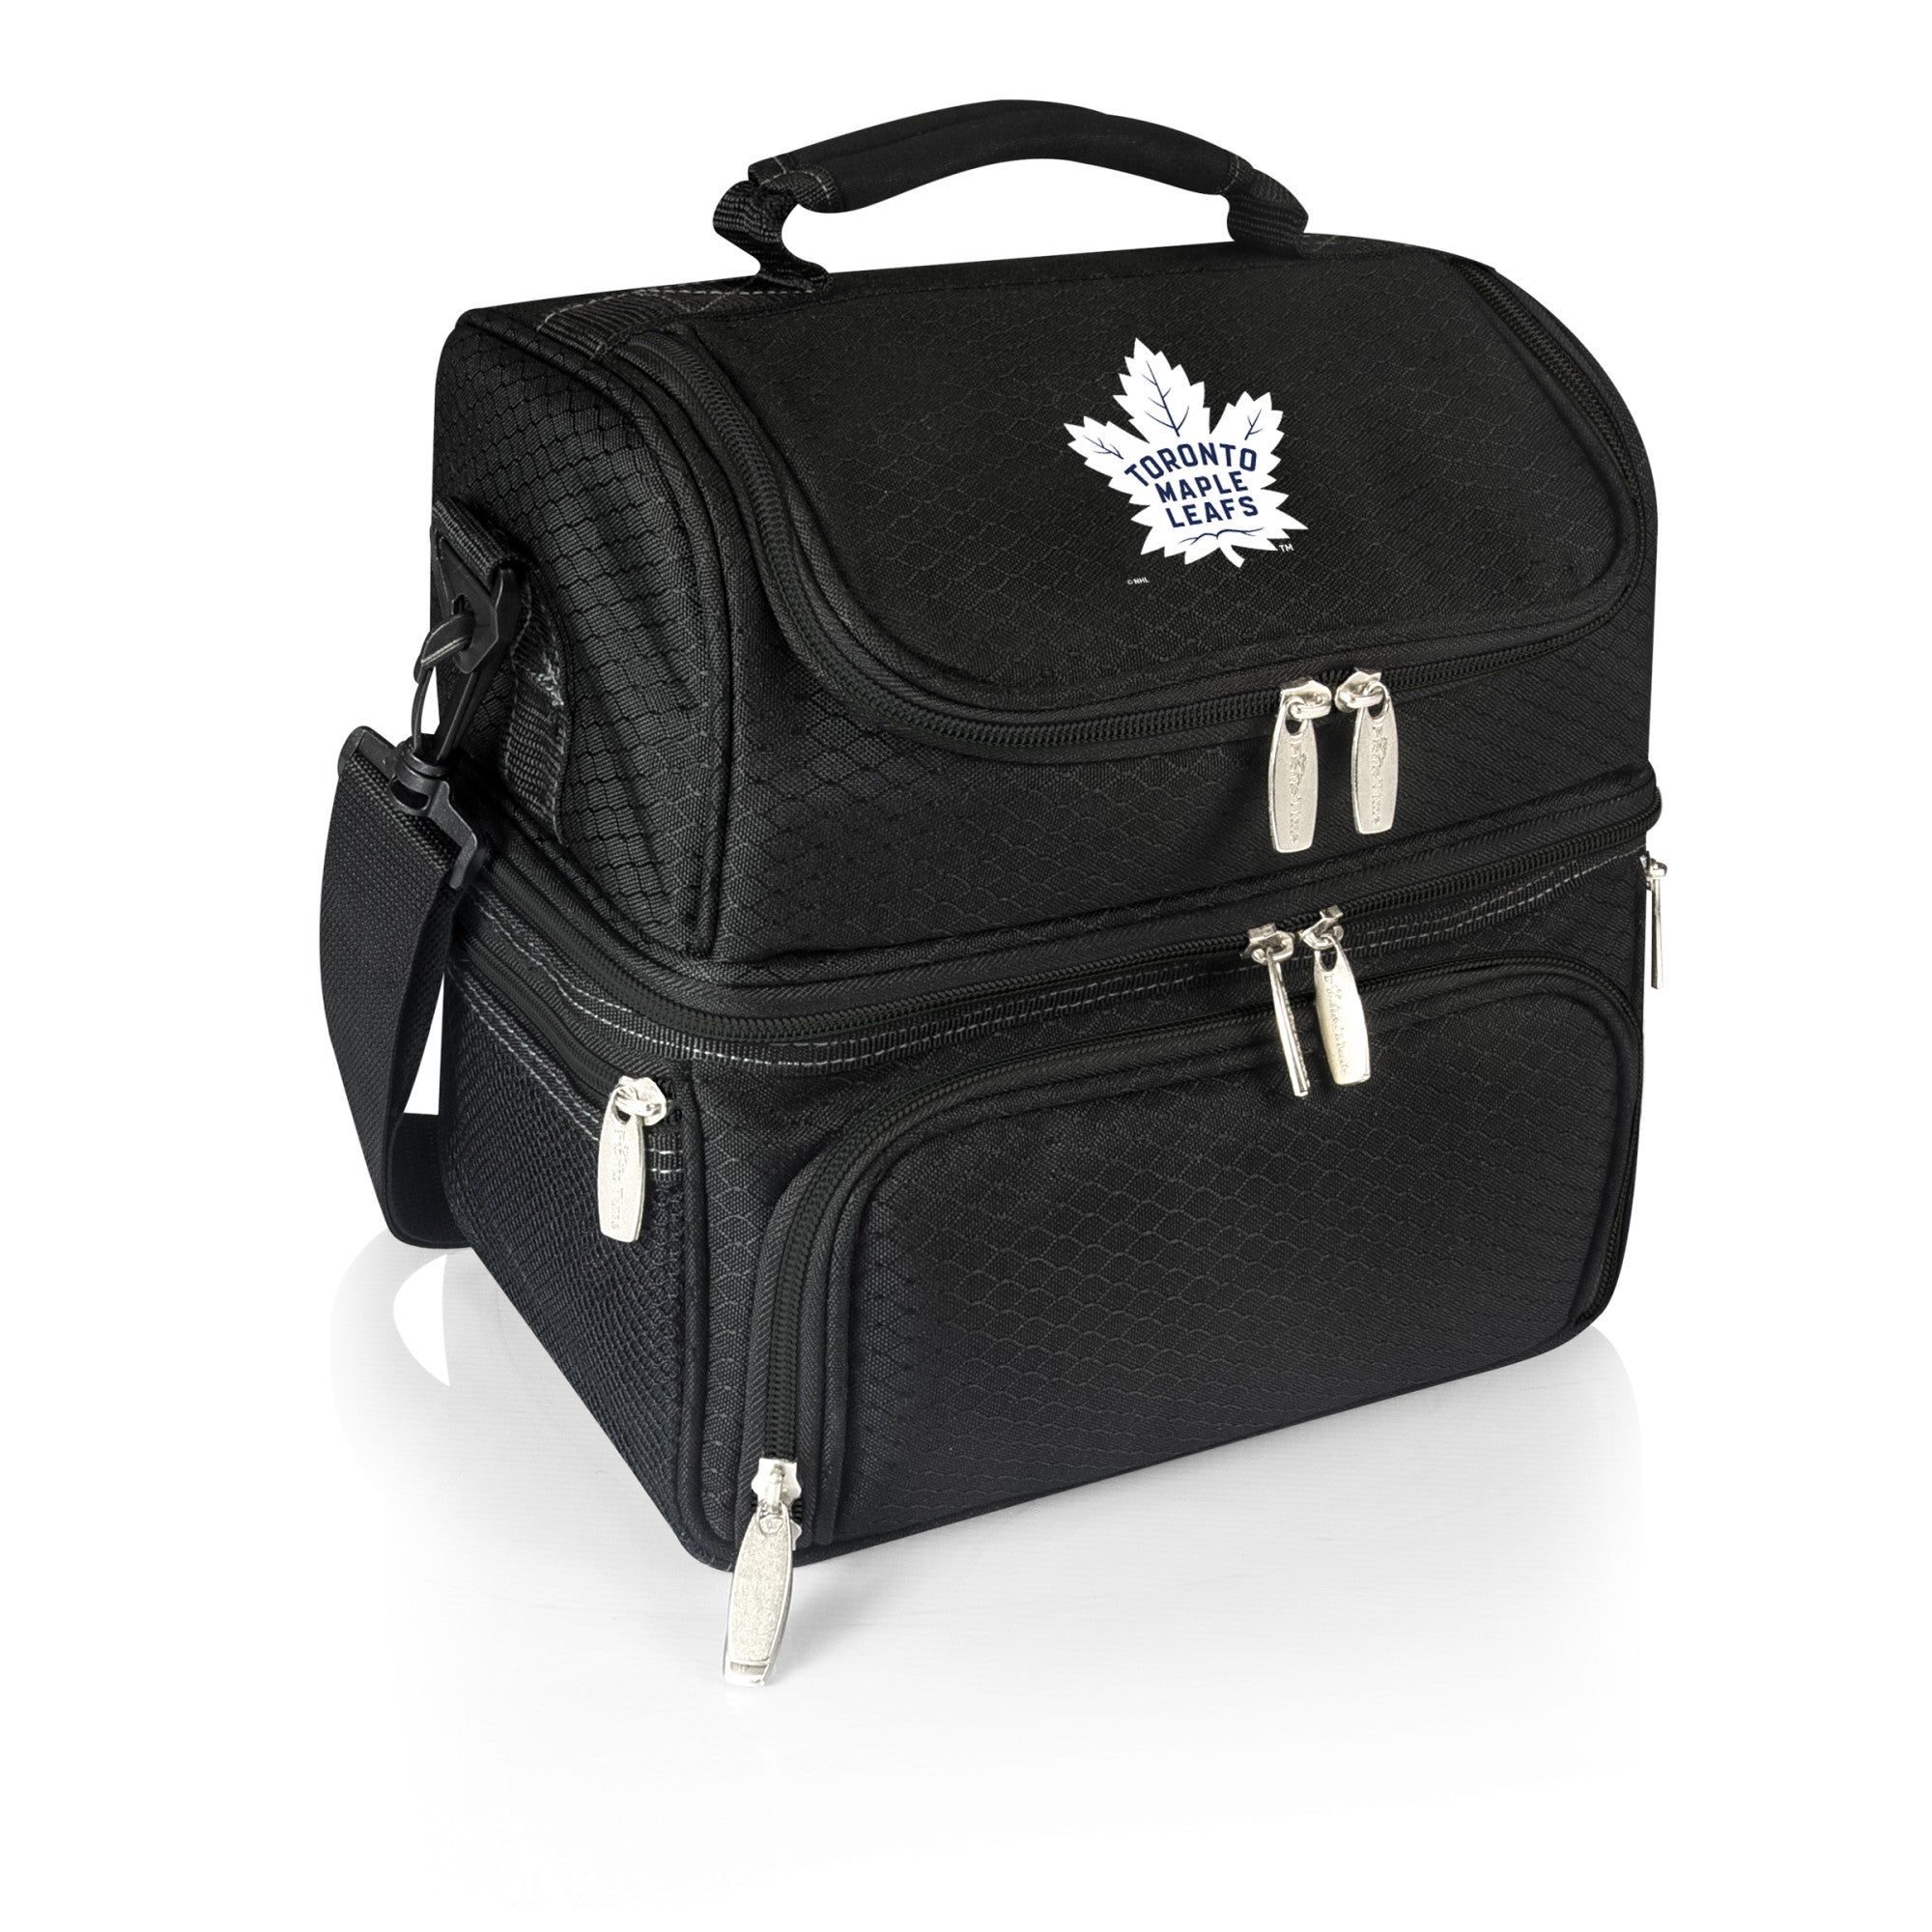 Toronto Maple Leafs - Pranzo Lunch Bag Cooler with Utensils